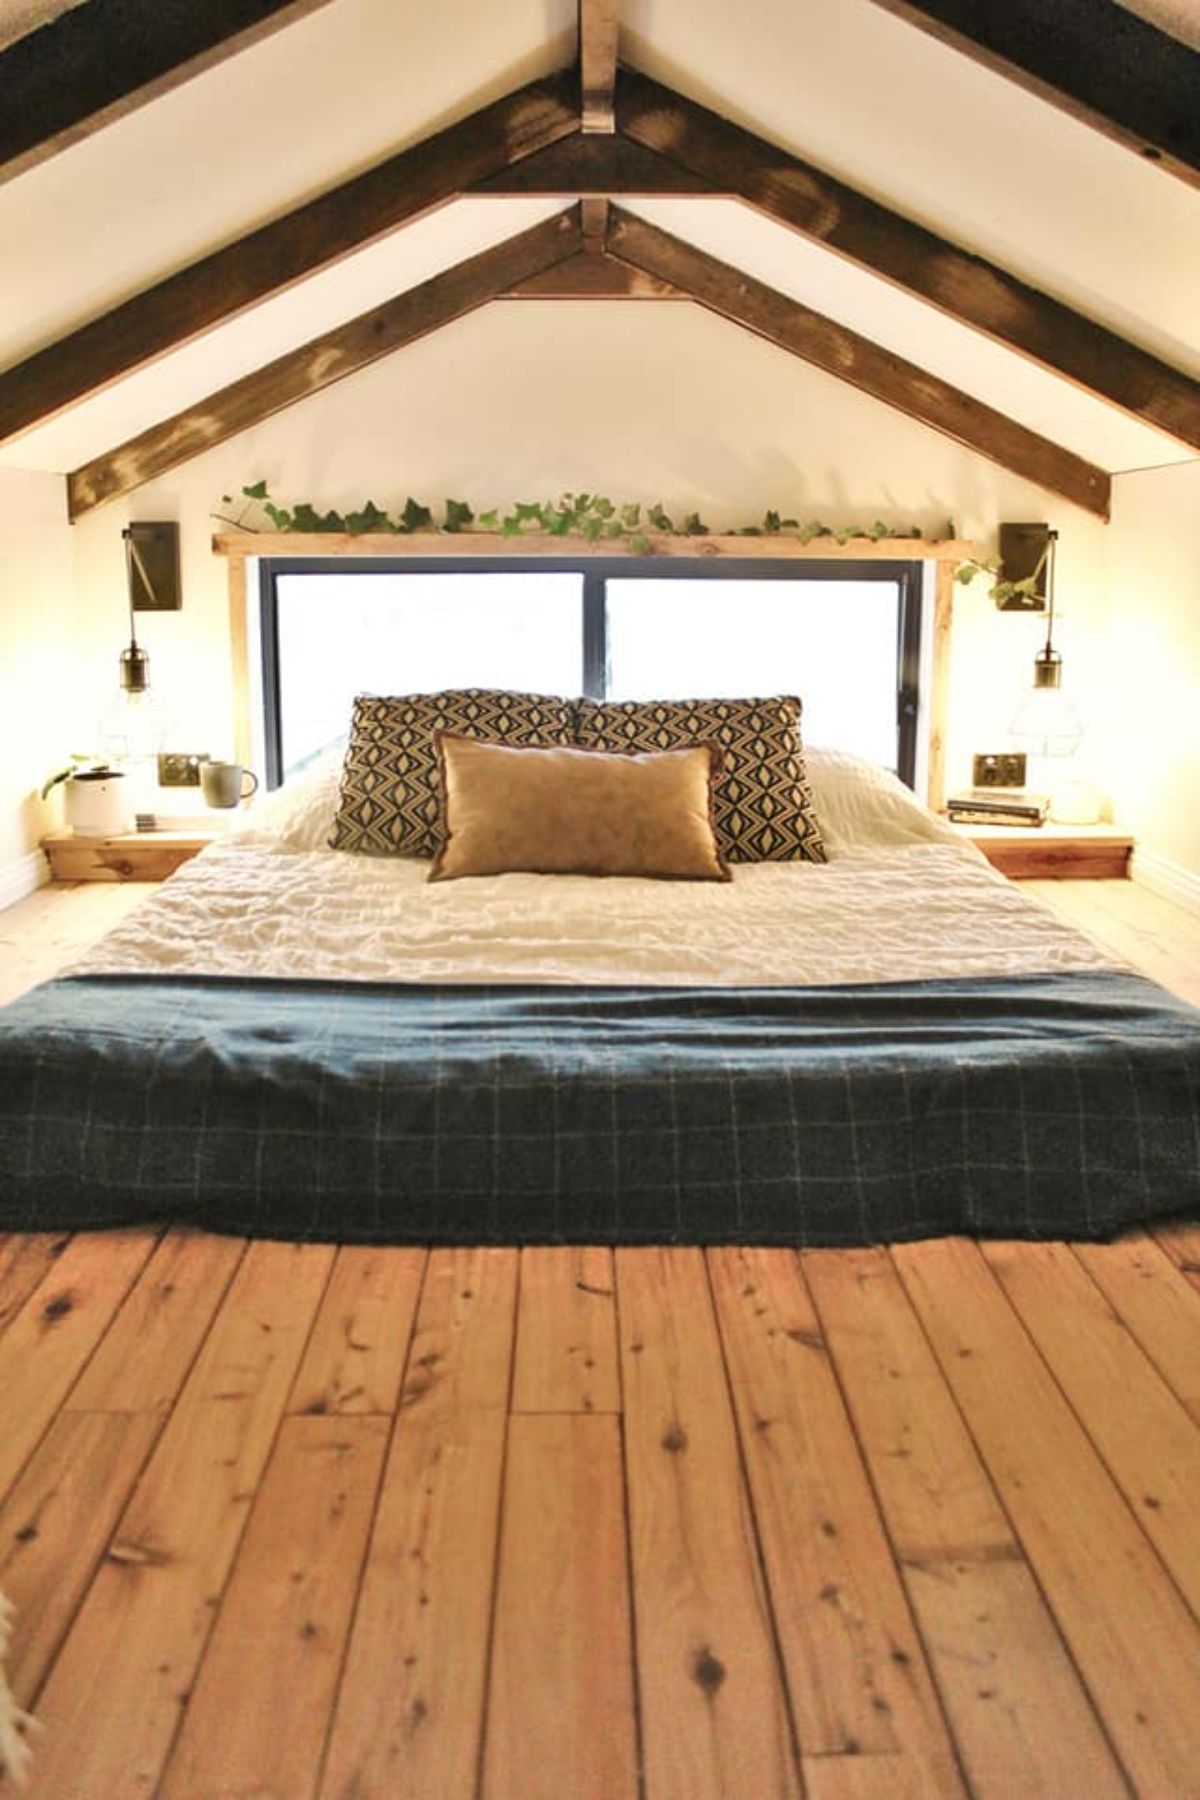 Loft bedroom above the bathroom has a comfortable king size mattress and side table